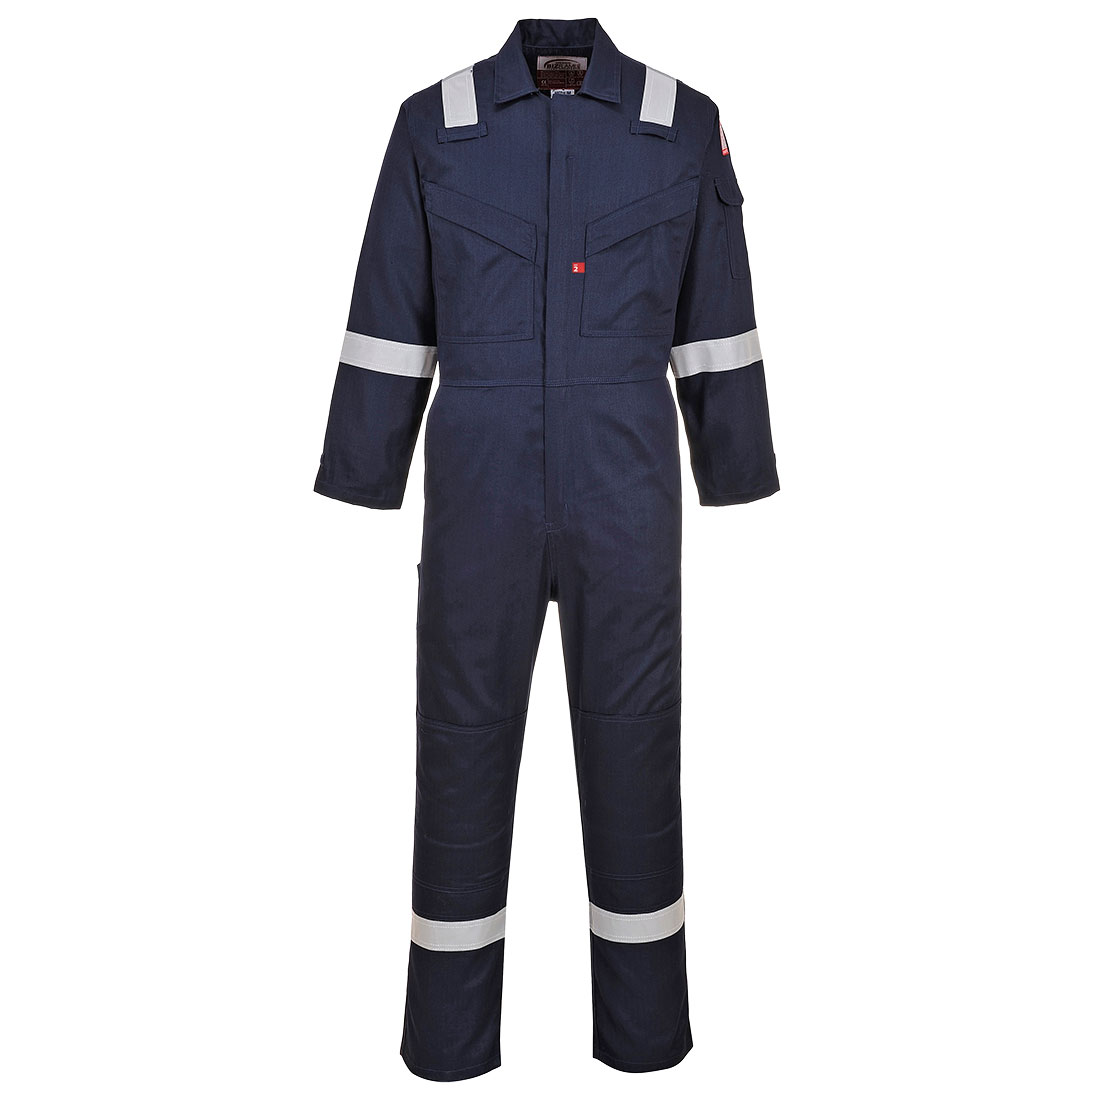 UFR21 Portwest® Bizflame® Work Flame-Resistant ARC2 Anti-Static Lightweight Coveralls - Navy